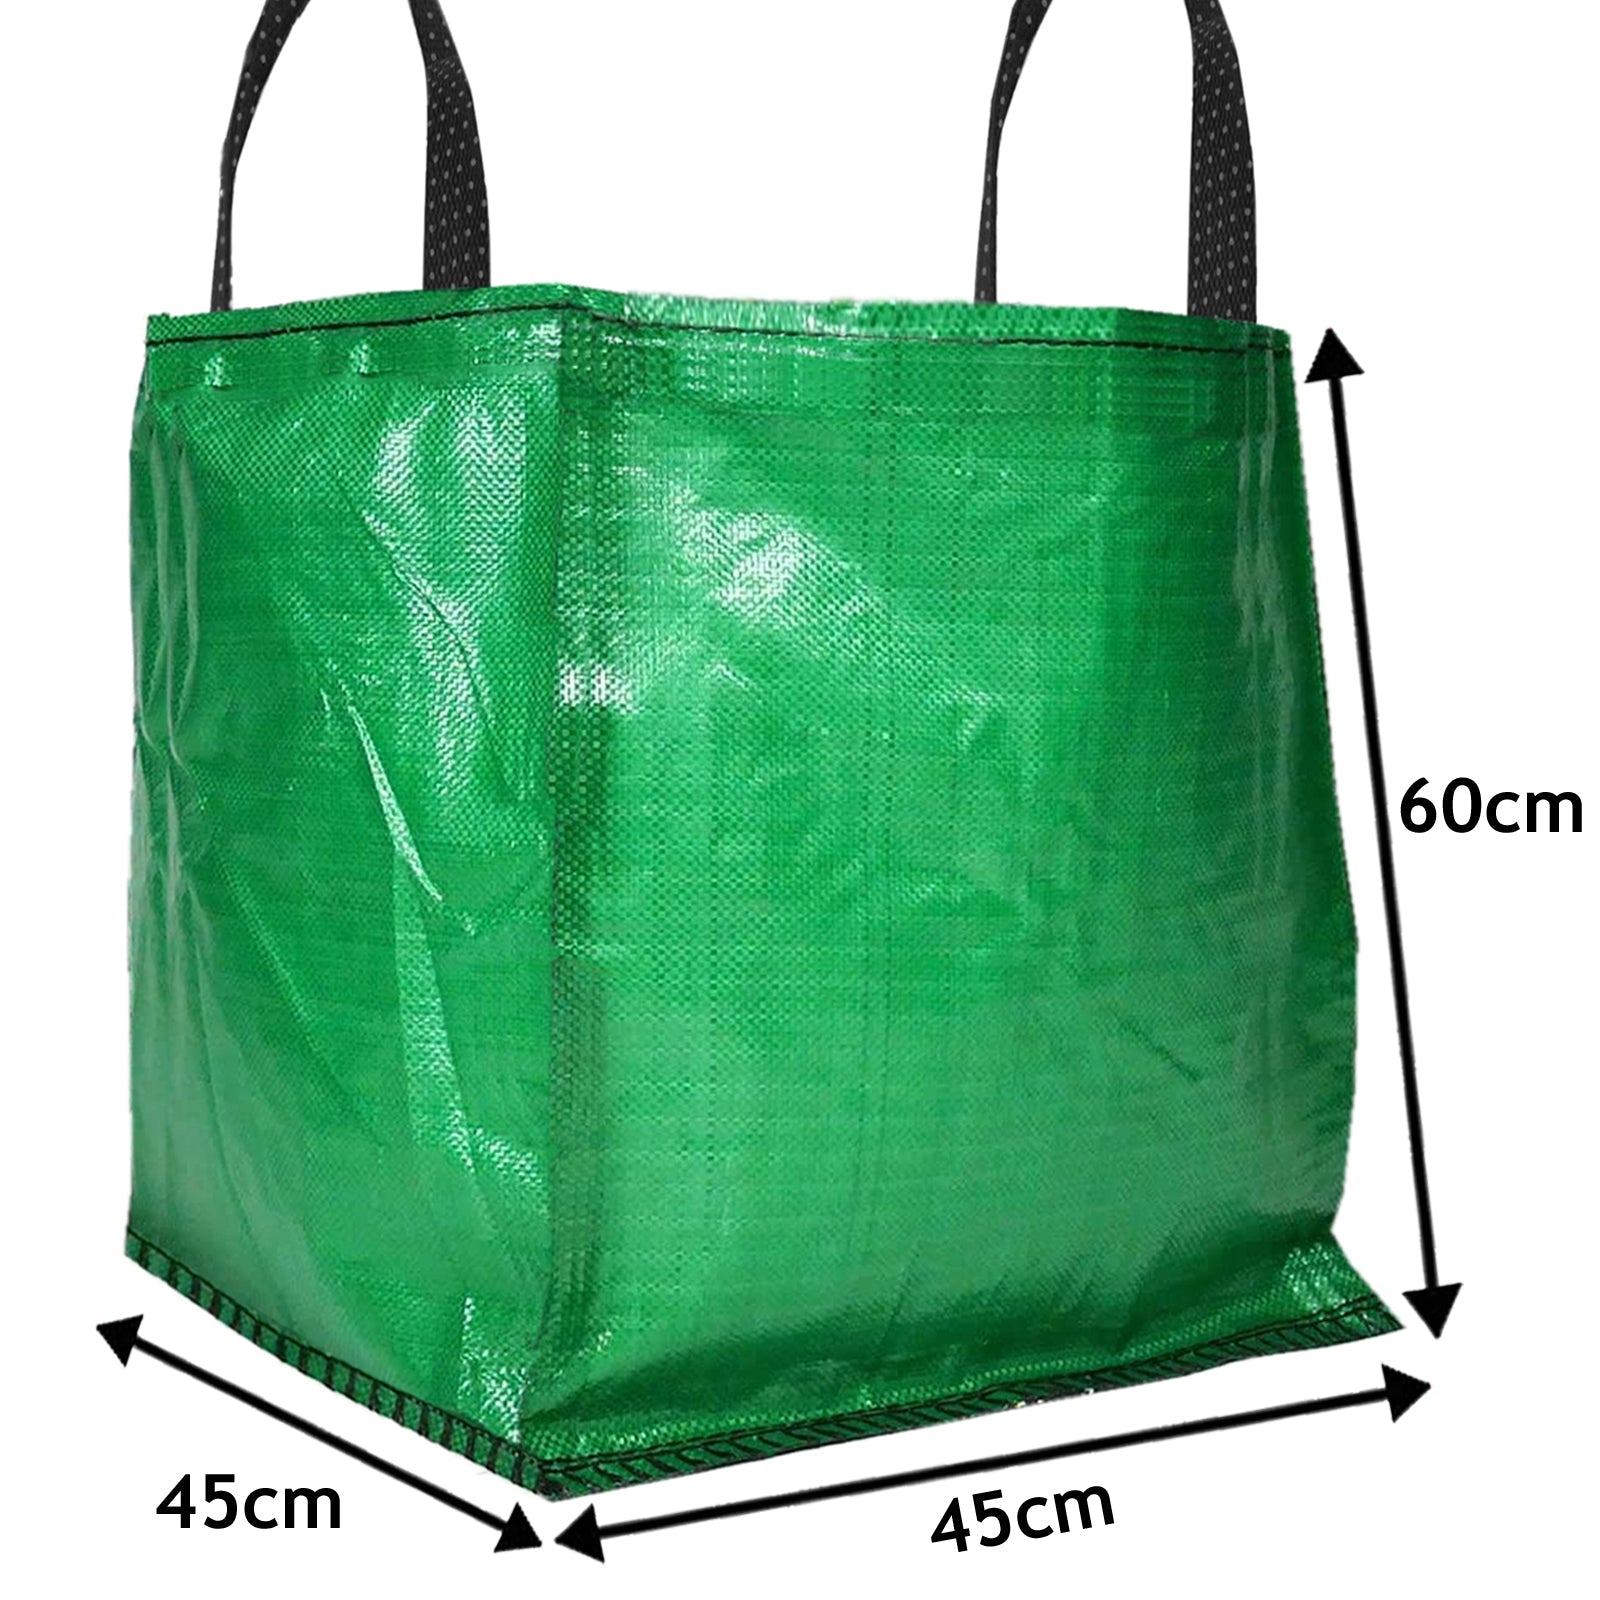 Large Garden Waste Recycling Tip Bags Heavy Duty Non Tear Woven Plastic Sack x 3